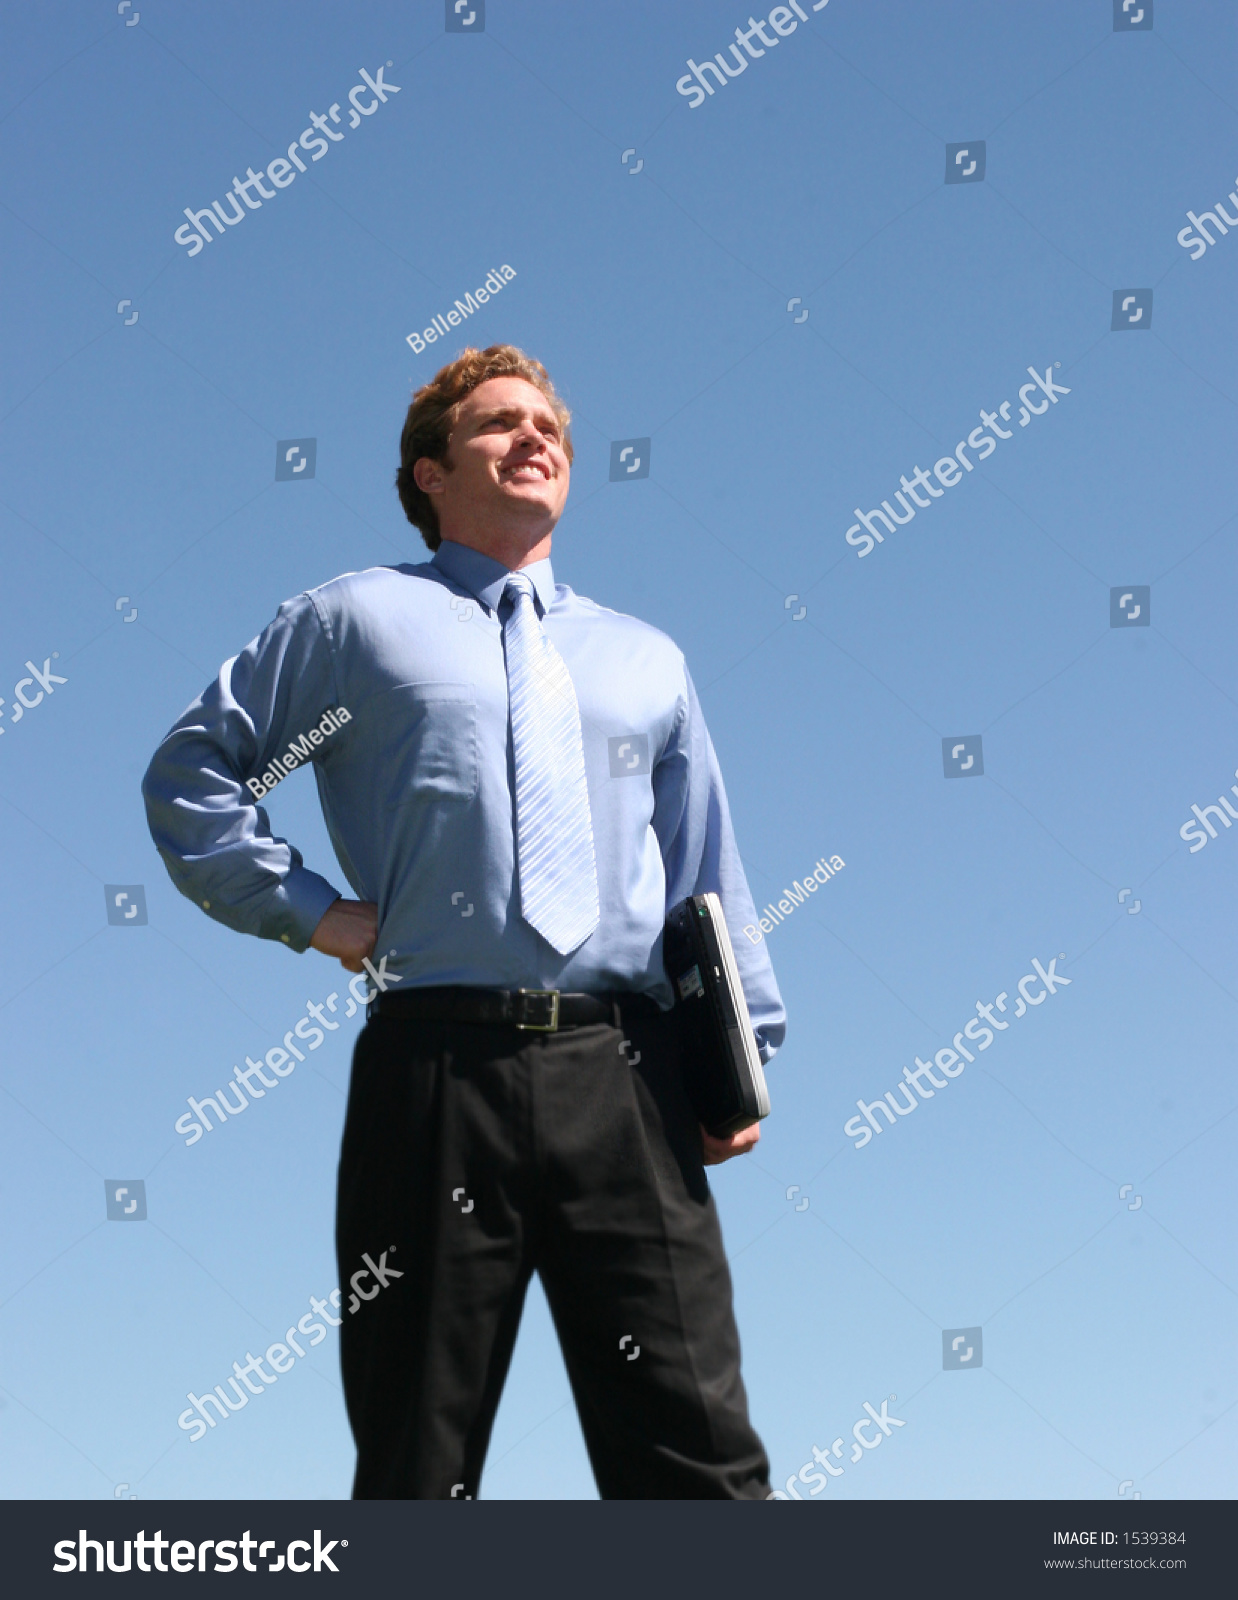 Business man in blue shirt and blue tie, holding laptop against blue sky #1539384